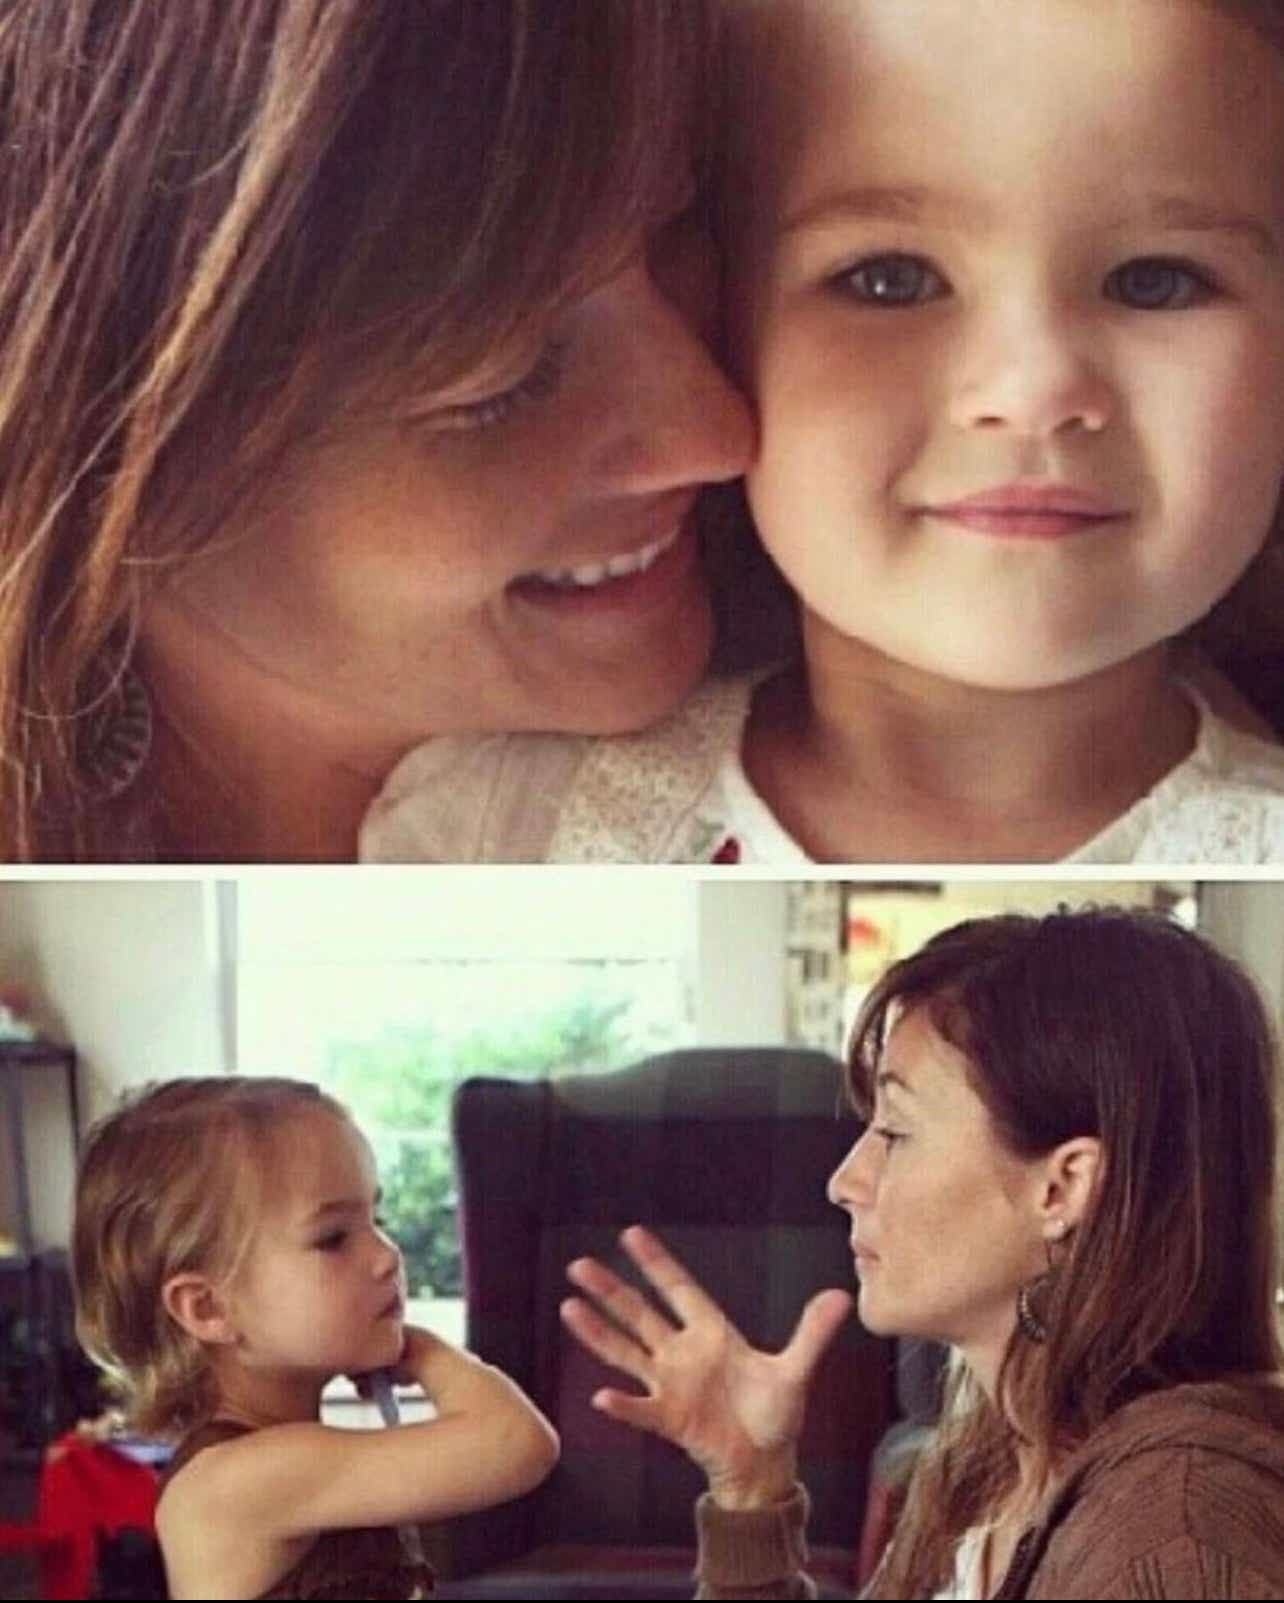 photos of actress millie simmonds as a toddler with her mom, learning to sign 